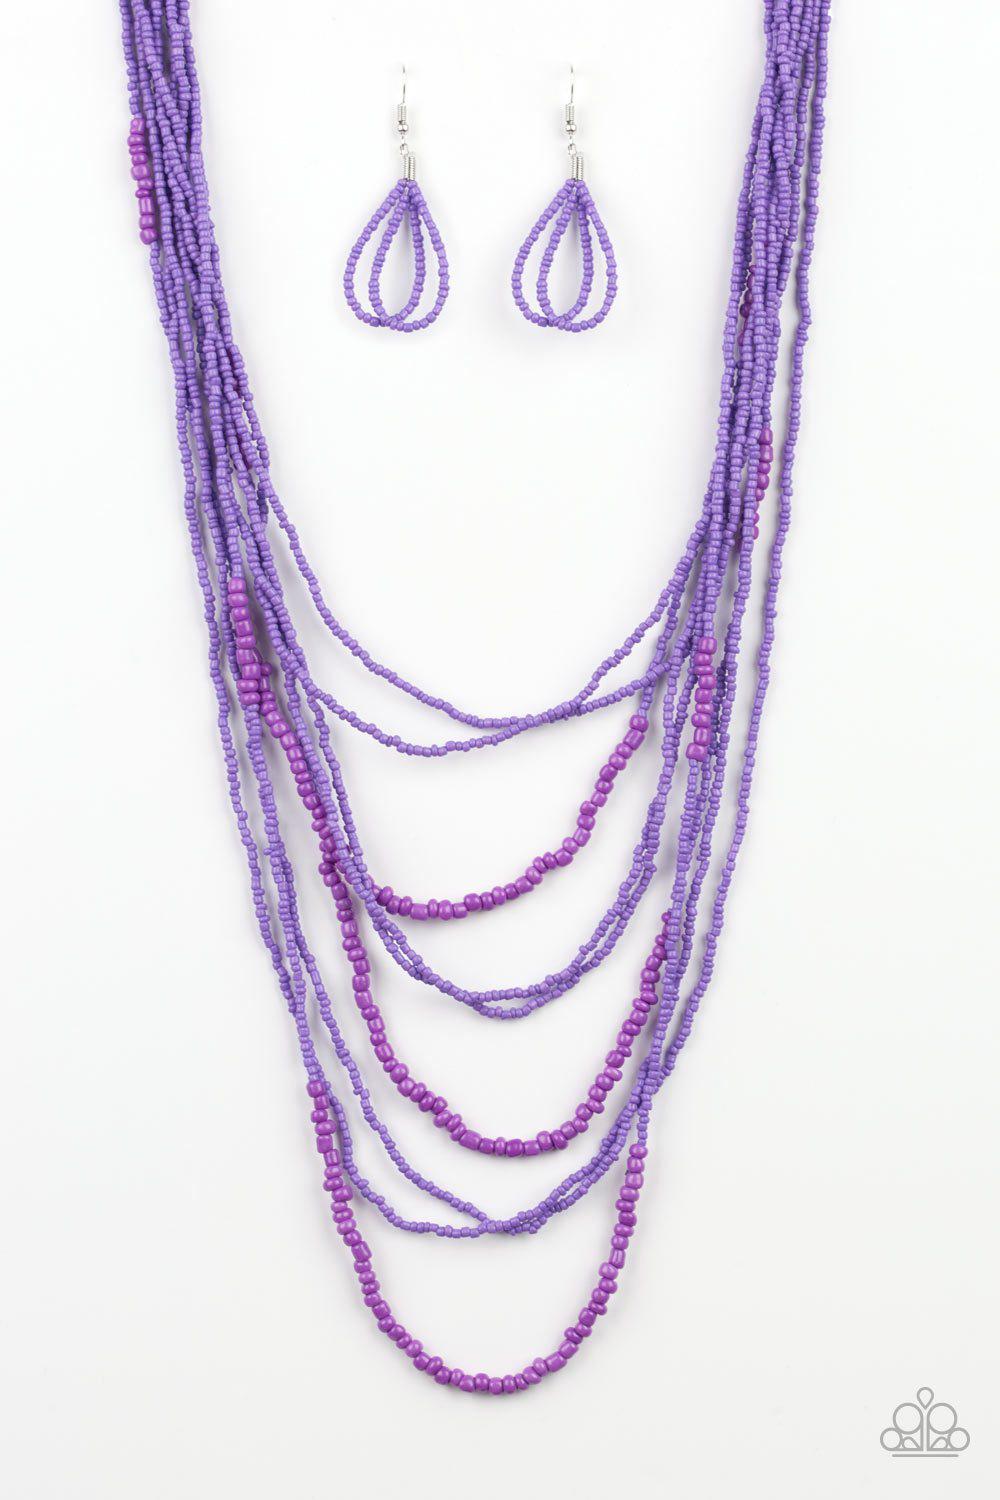 Totally Tonga Purple Seed Bead Necklace and matching Earrings - Paparazzi Accessories-CarasShop.com - $5 Jewelry by Cara Jewels